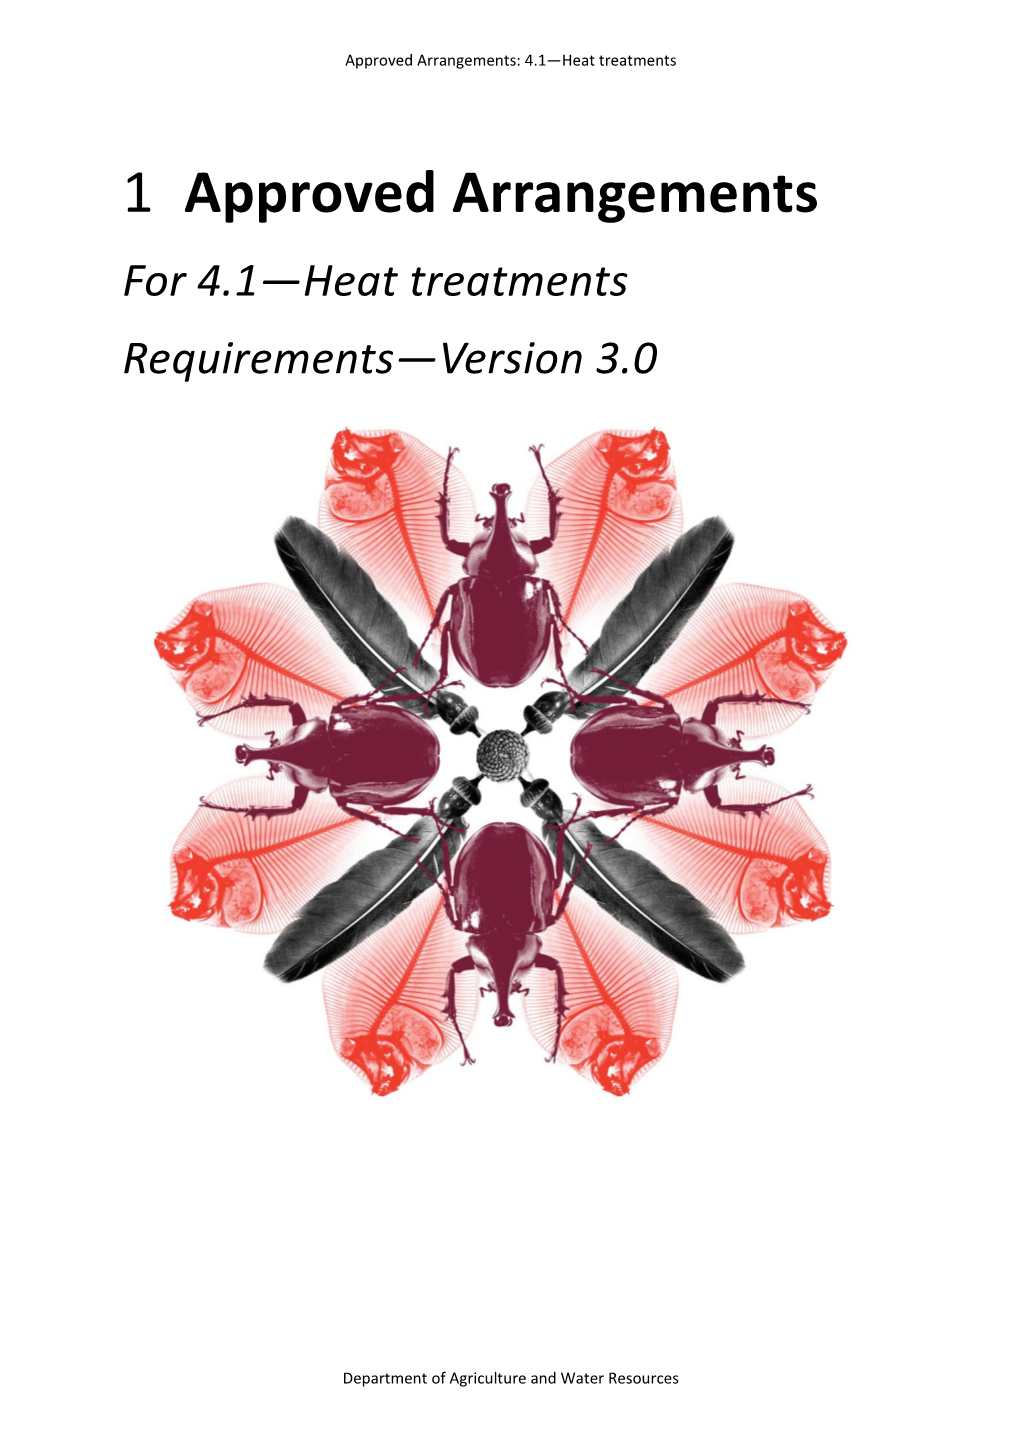 Approved Arrangements for 4.1 - Heat Treatments